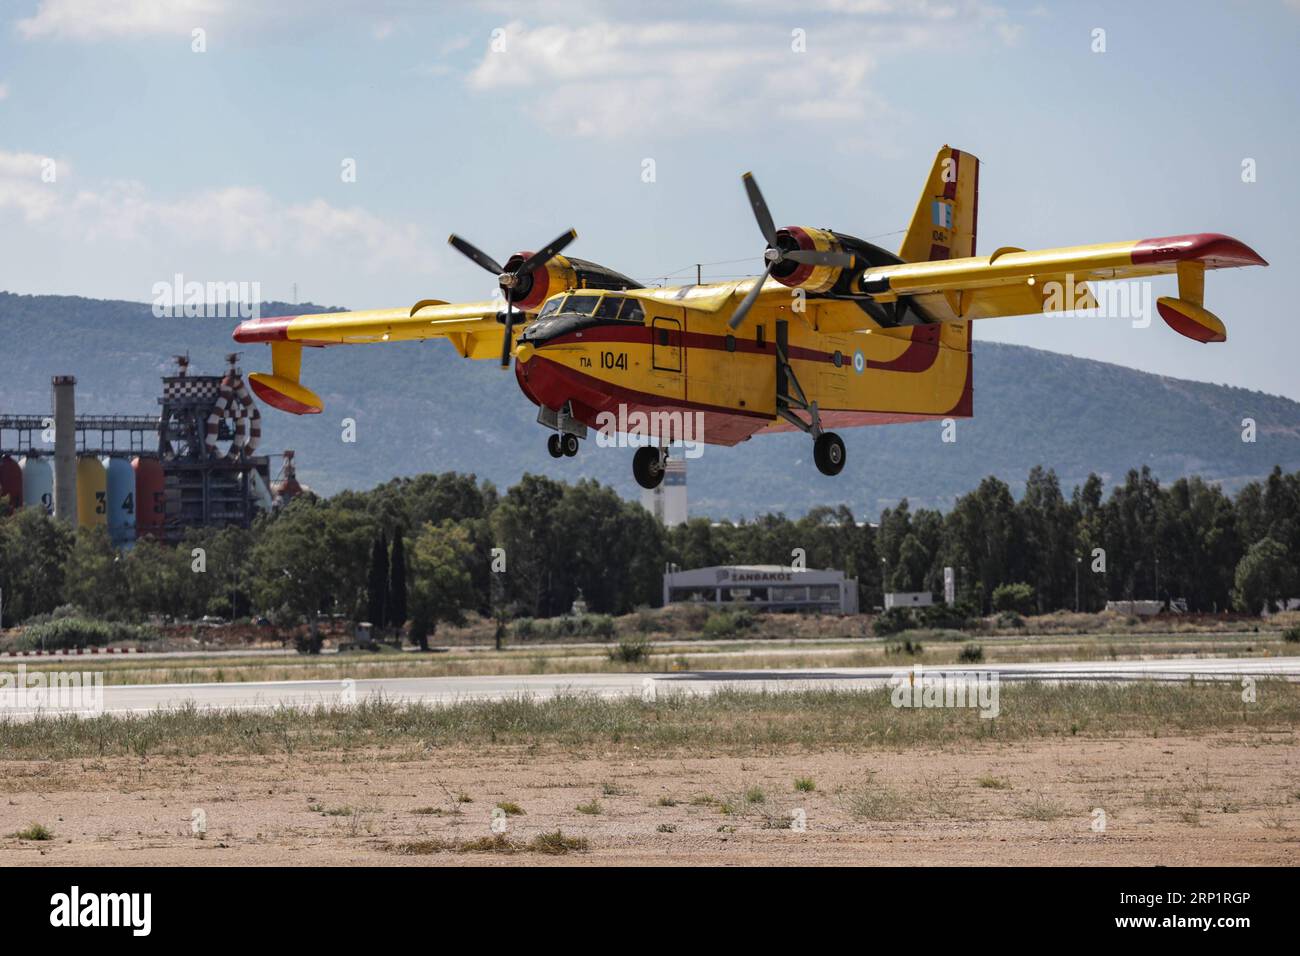 (180721) -- ATHENS, July 21, 2018 -- Photo taken on July 20, 2018 shows a firefighting aircraft of 355 Tactical Transport Squadron at the Elefsina Air Base, Athens, Greece. The 355 Tactical Transport Squadron was established in 1947 to fight wildfires. ) (zcc) GREECE-ATHENS-FIREFIGHTING SQUADRON LefterisxPartsalis PUBLICATIONxNOTxINxCHN Stock Photo